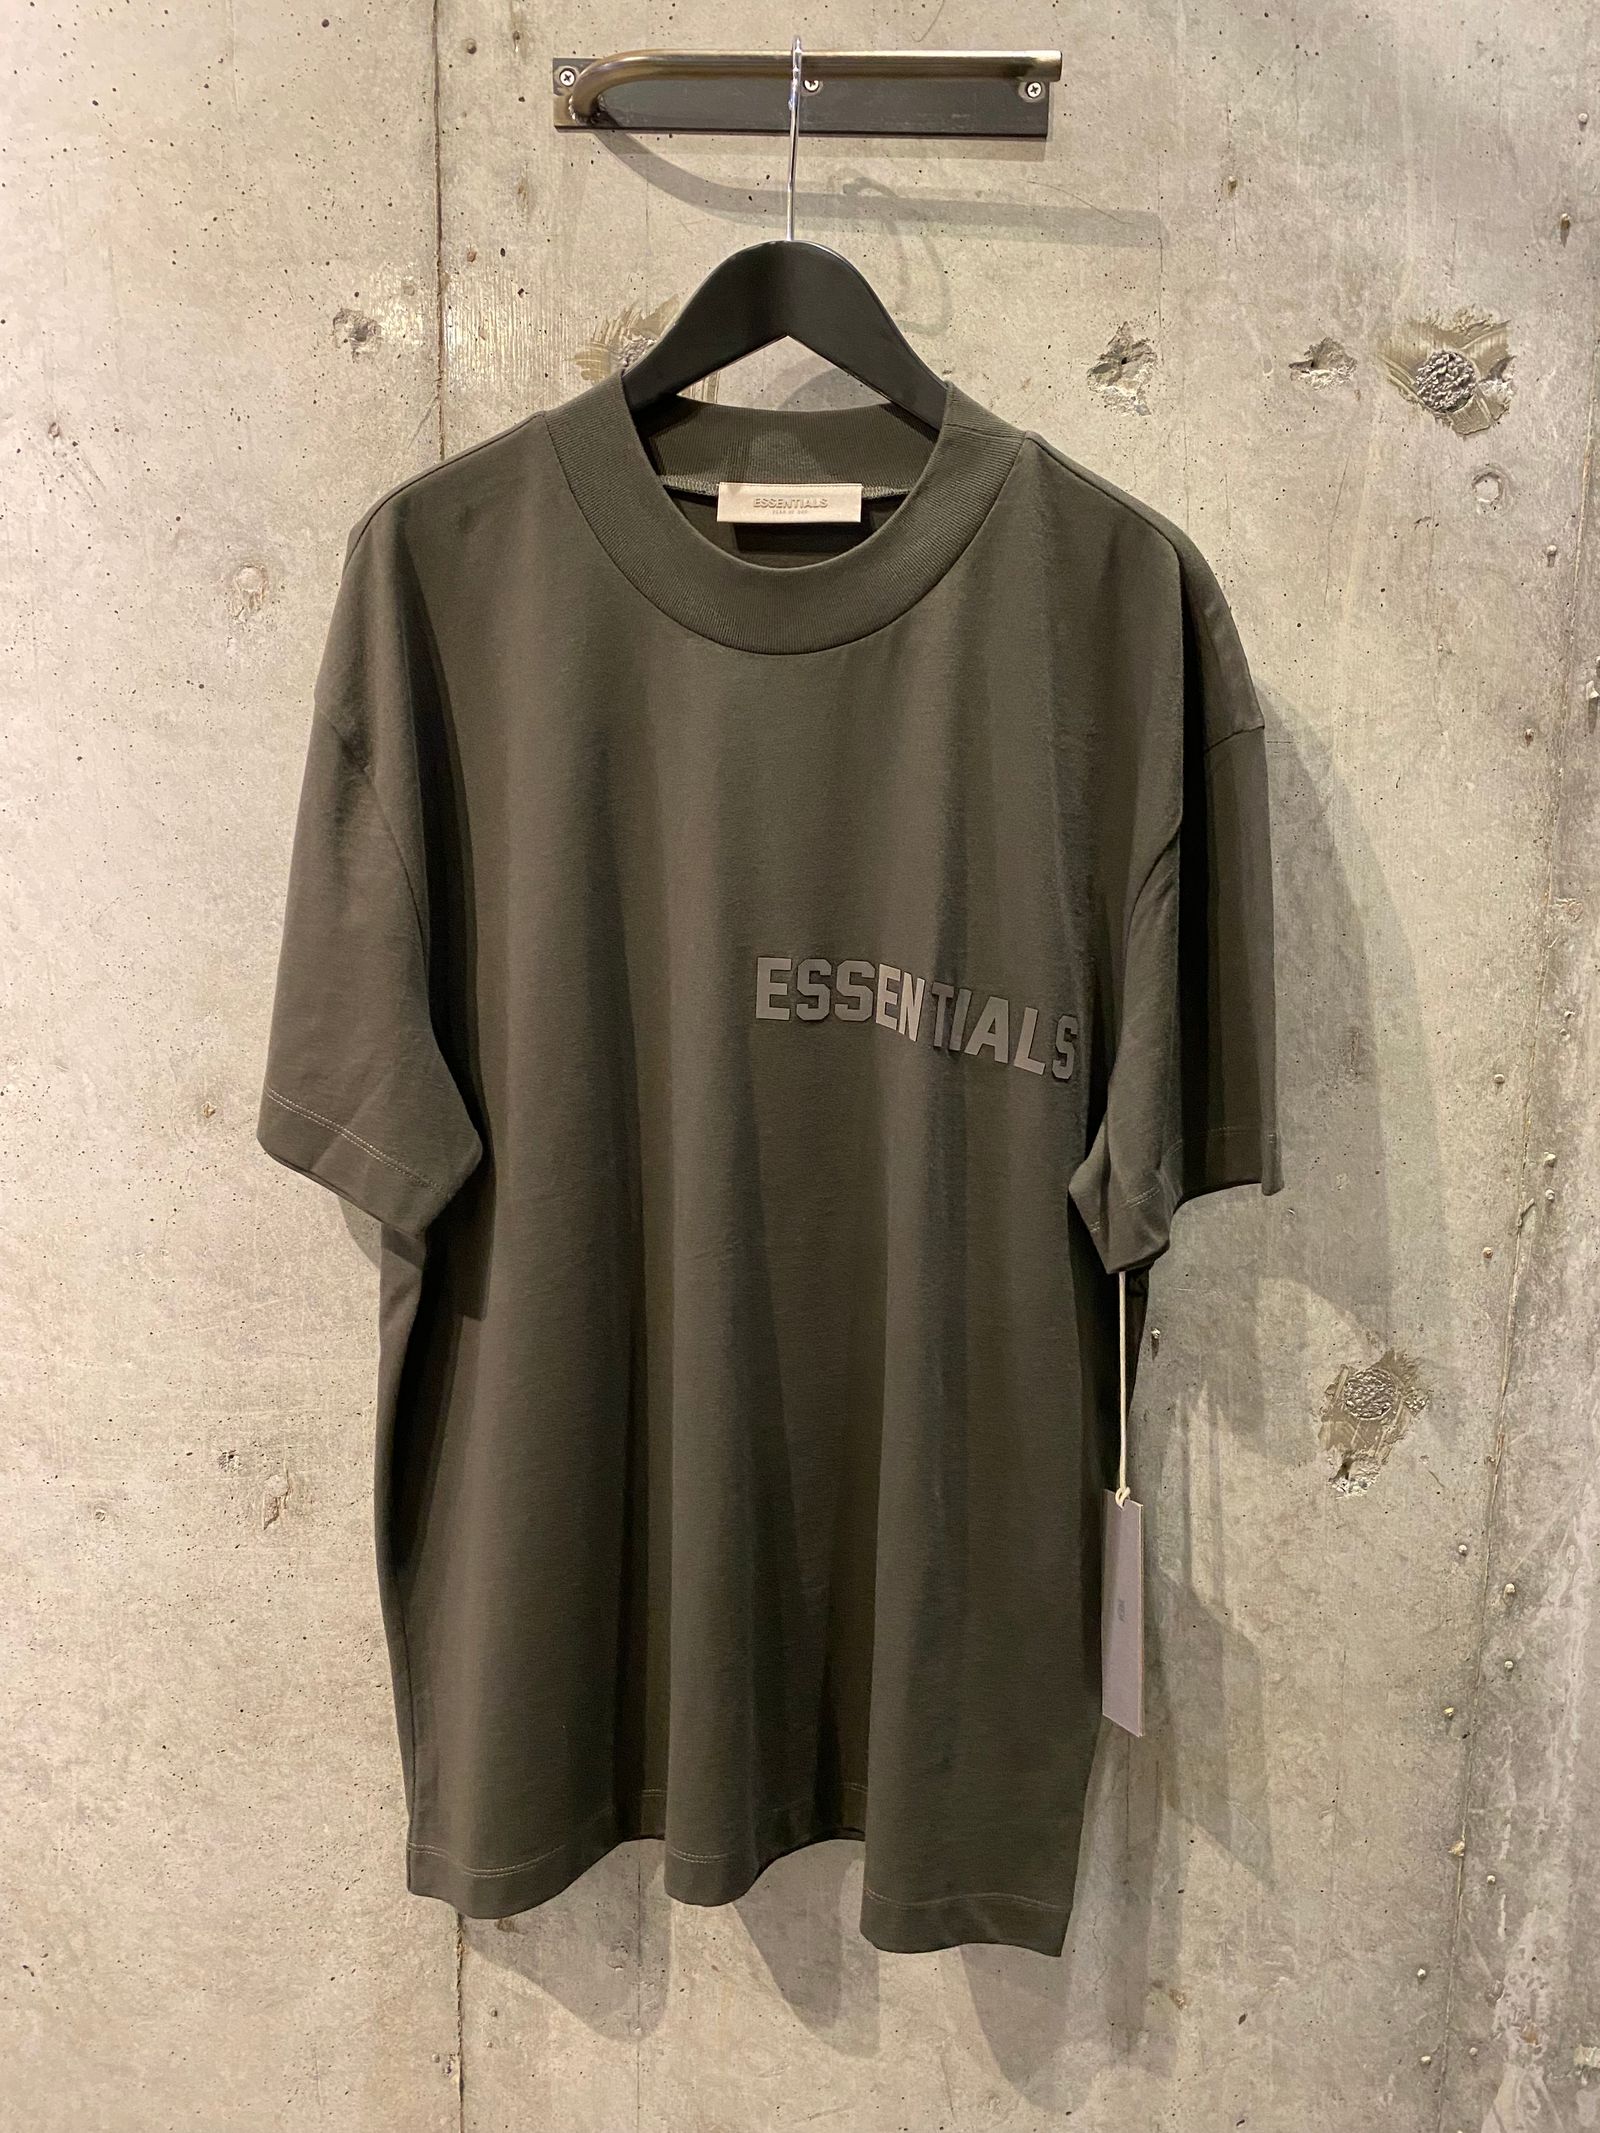 FOG ESSENTIALS - ESSENTIALS Tshirt(OFF BLACK) | R and another stories